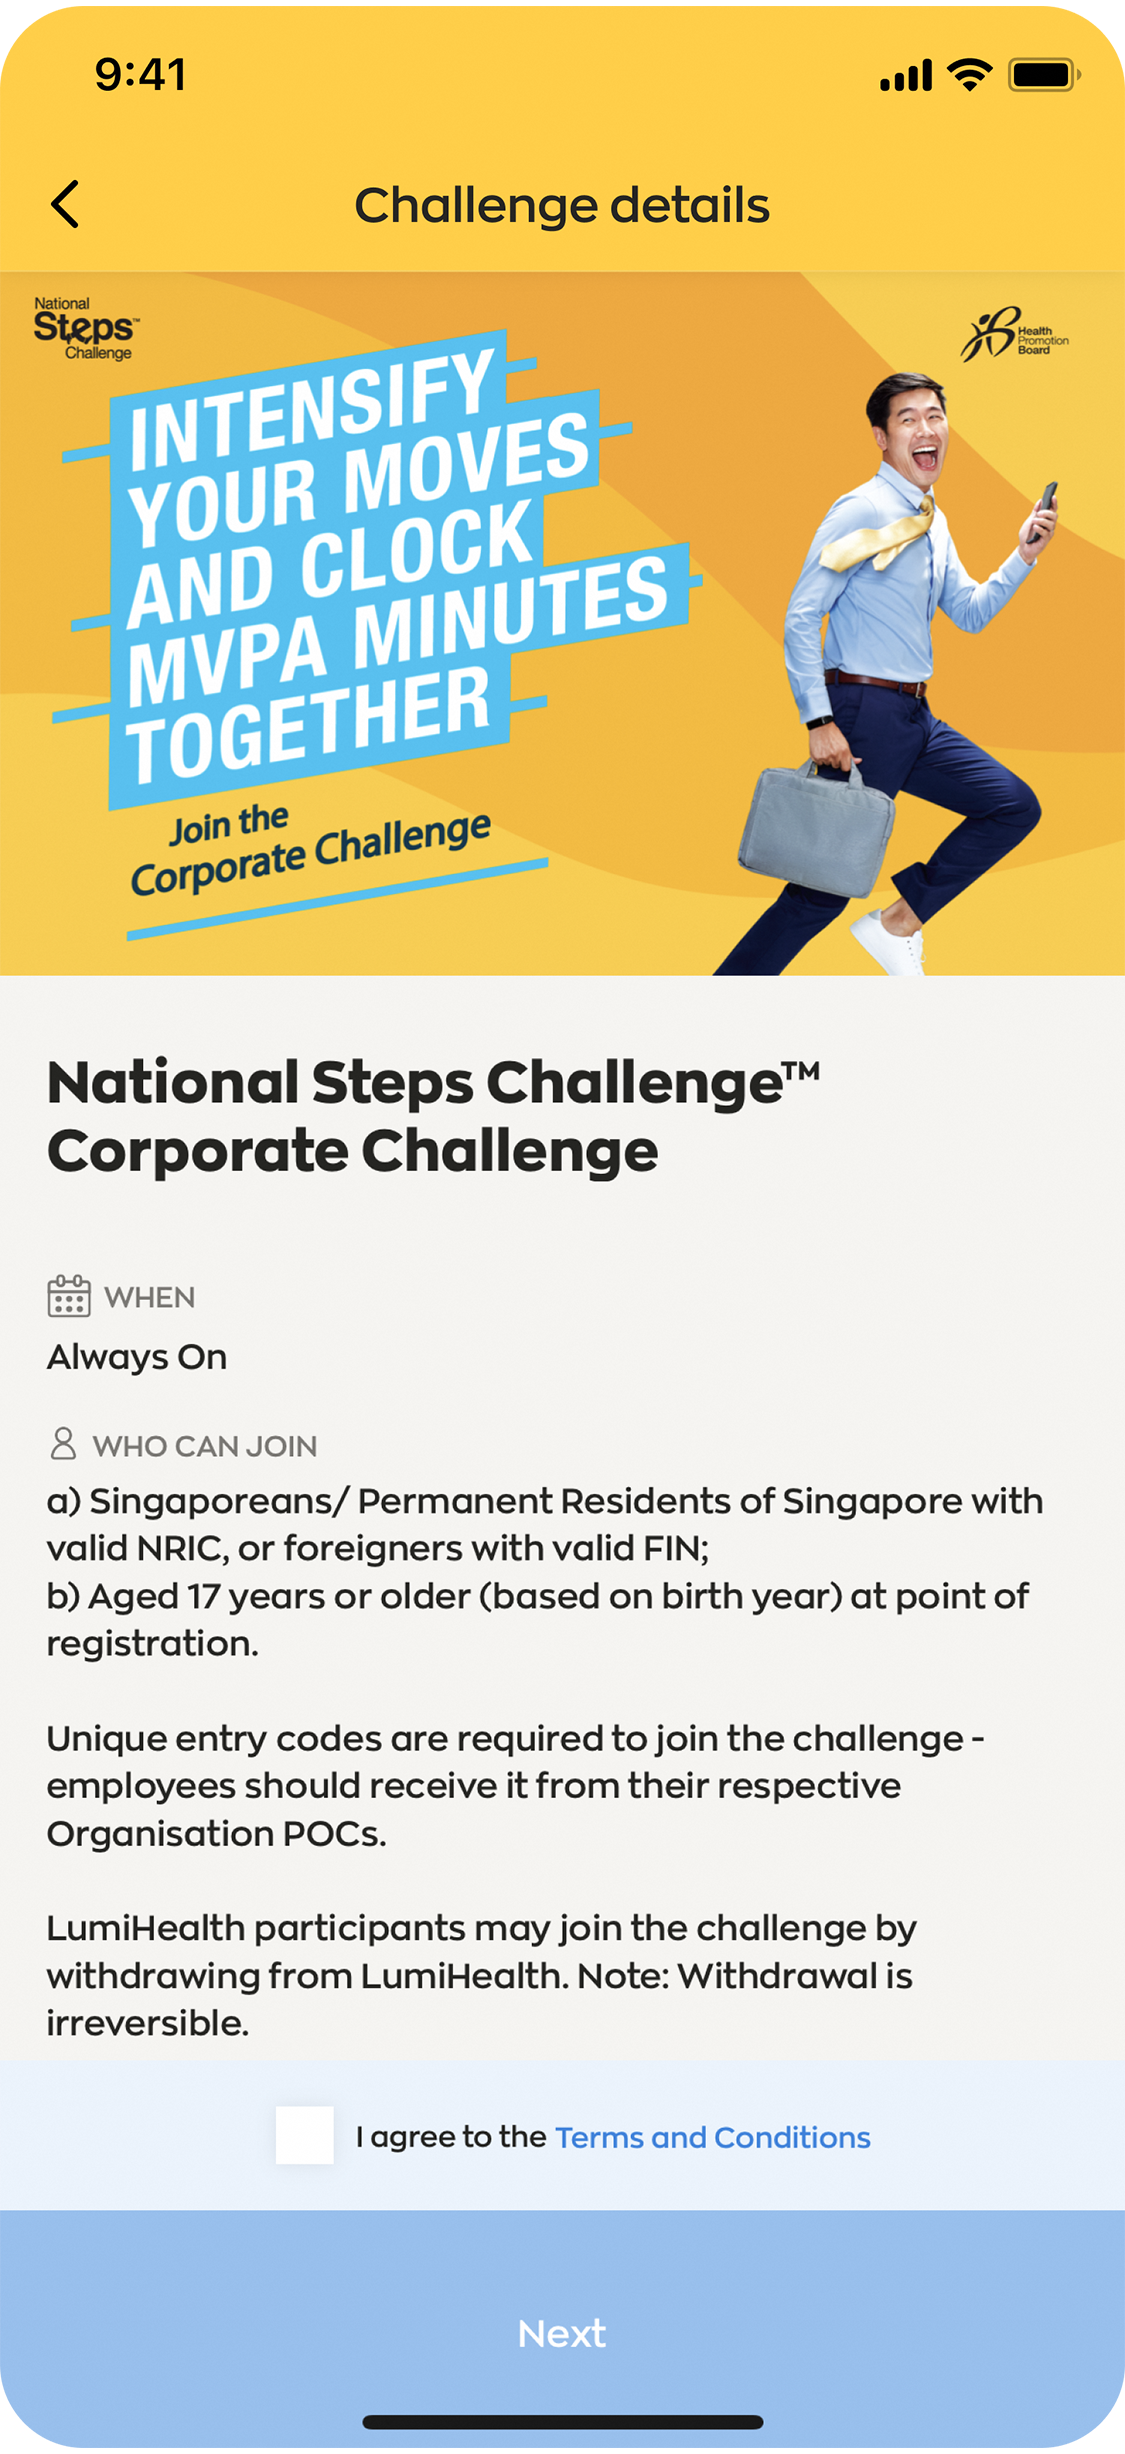 Read the challenge details and agree to the Terms and Conditions of the Corporate Challenge.